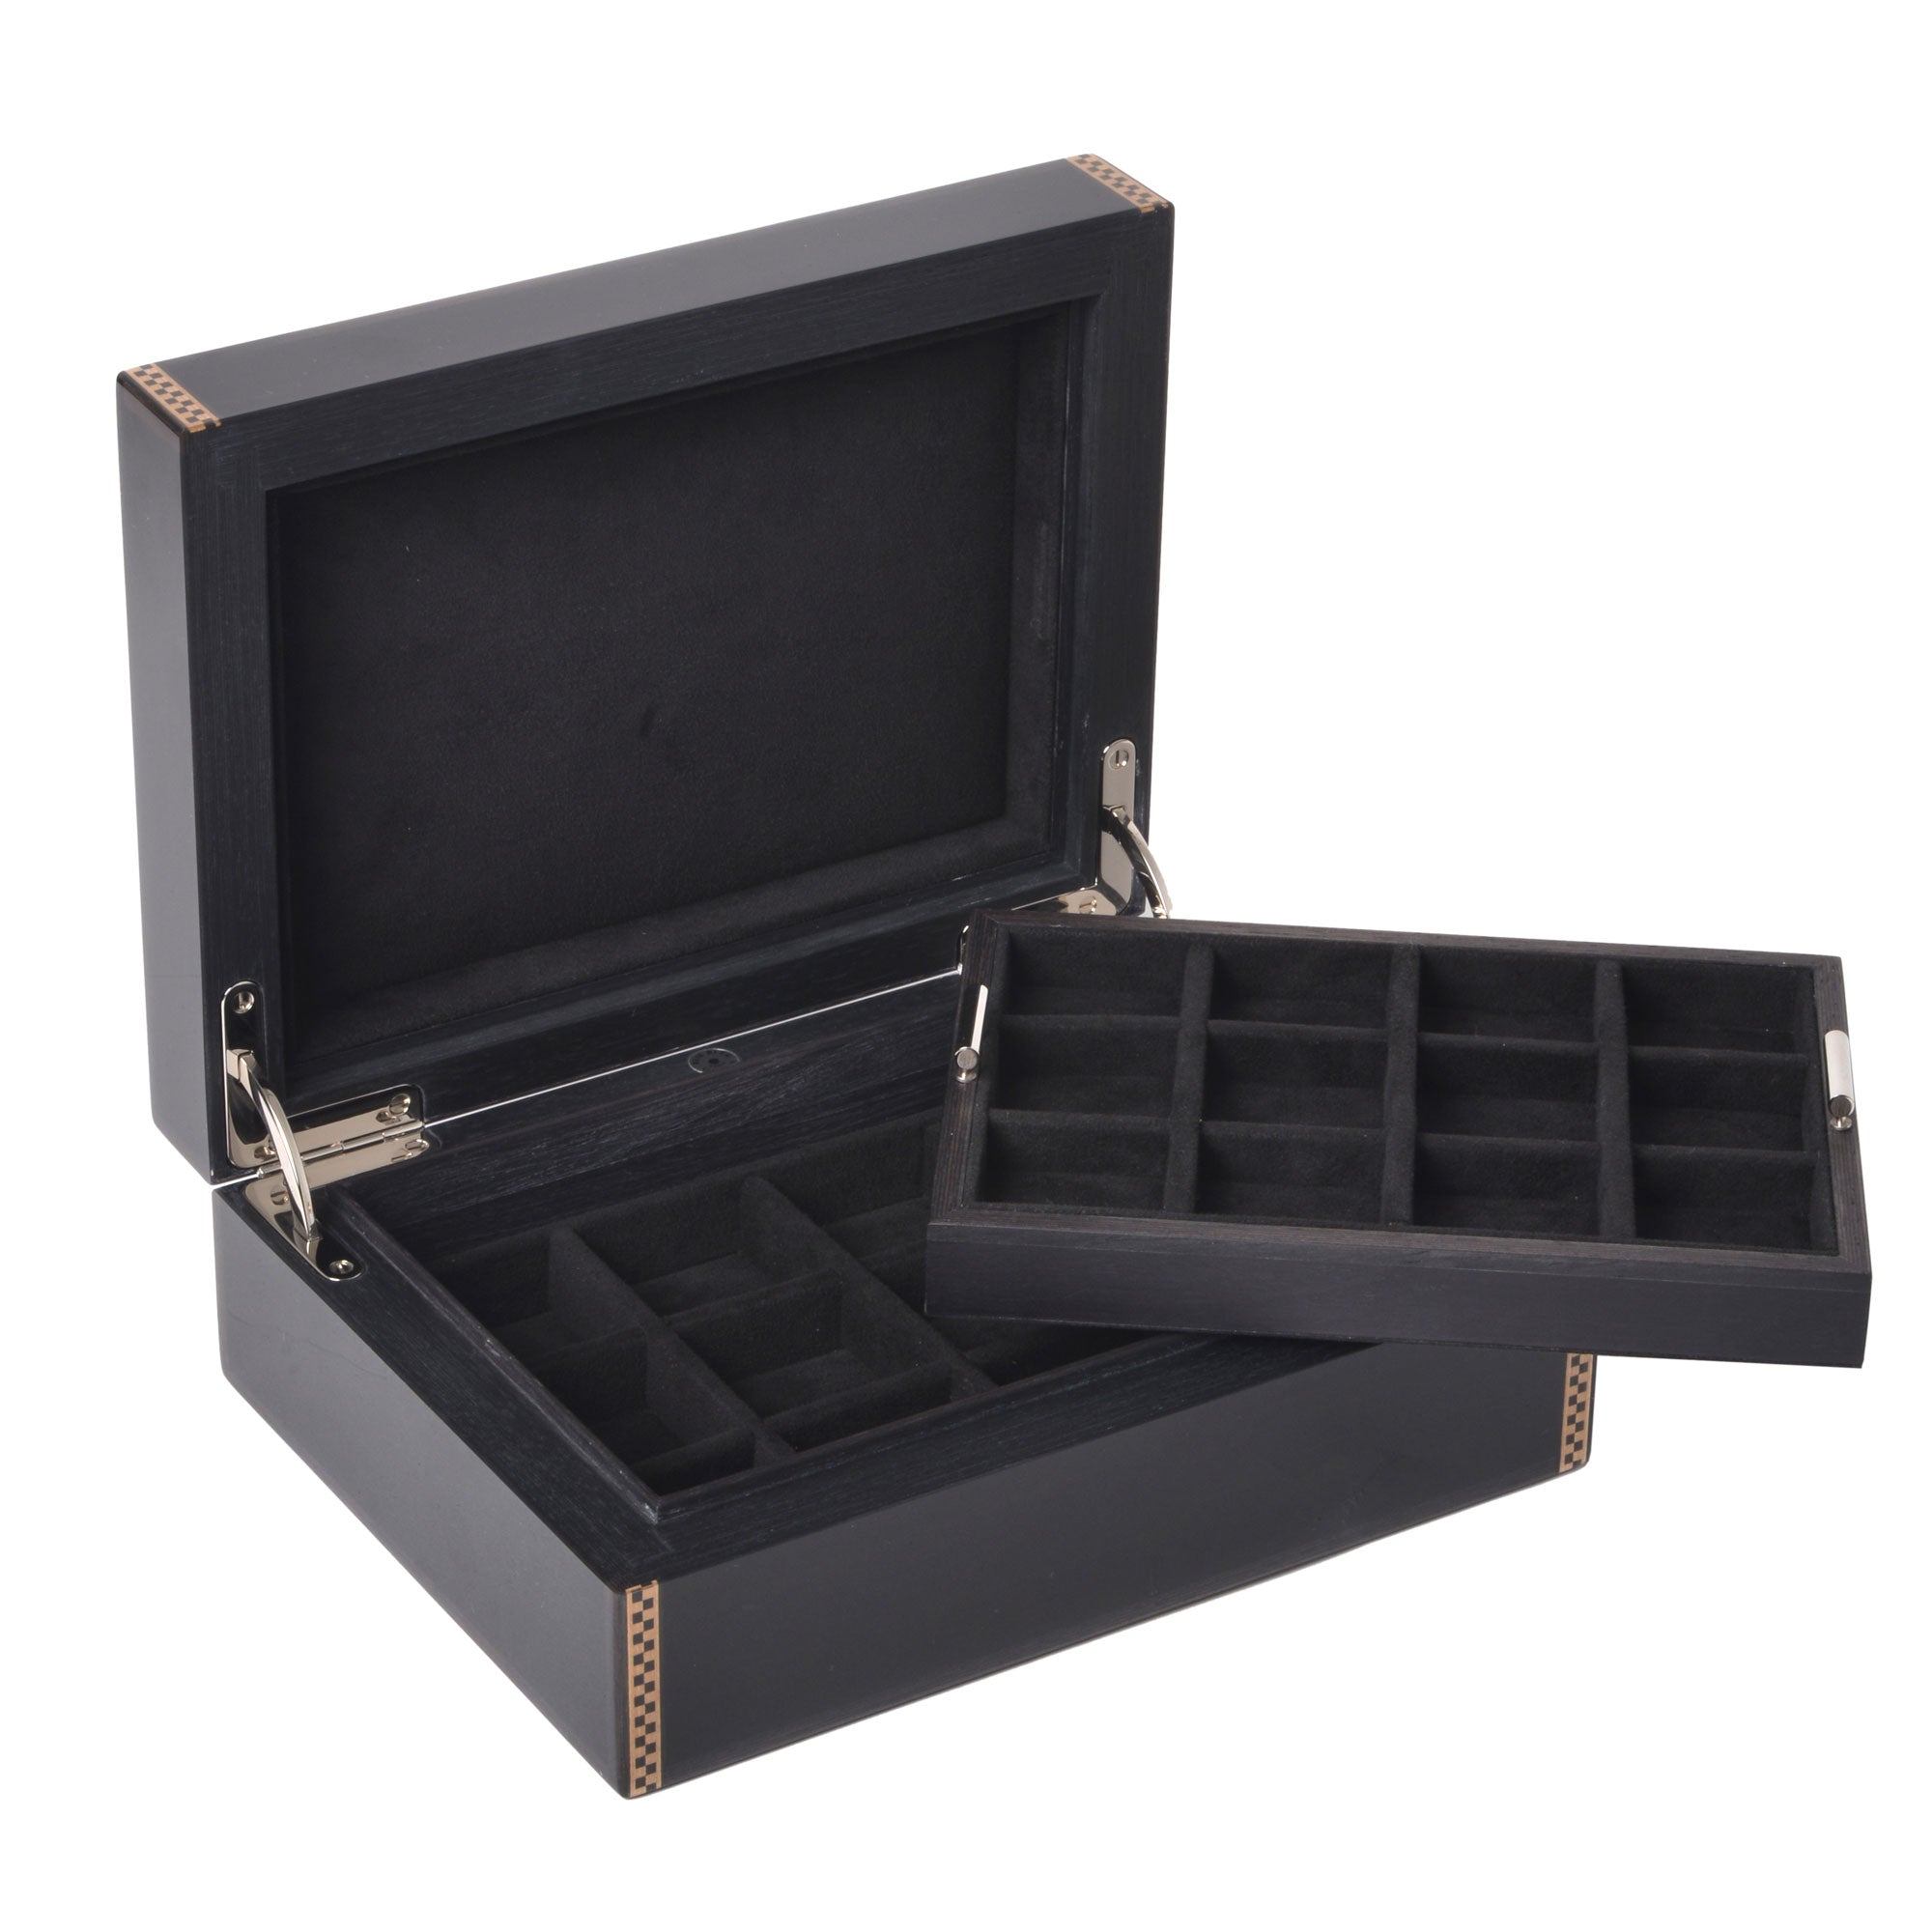 "Classique" - Boxed set of 24 rings or 24 pairs of cufflinks